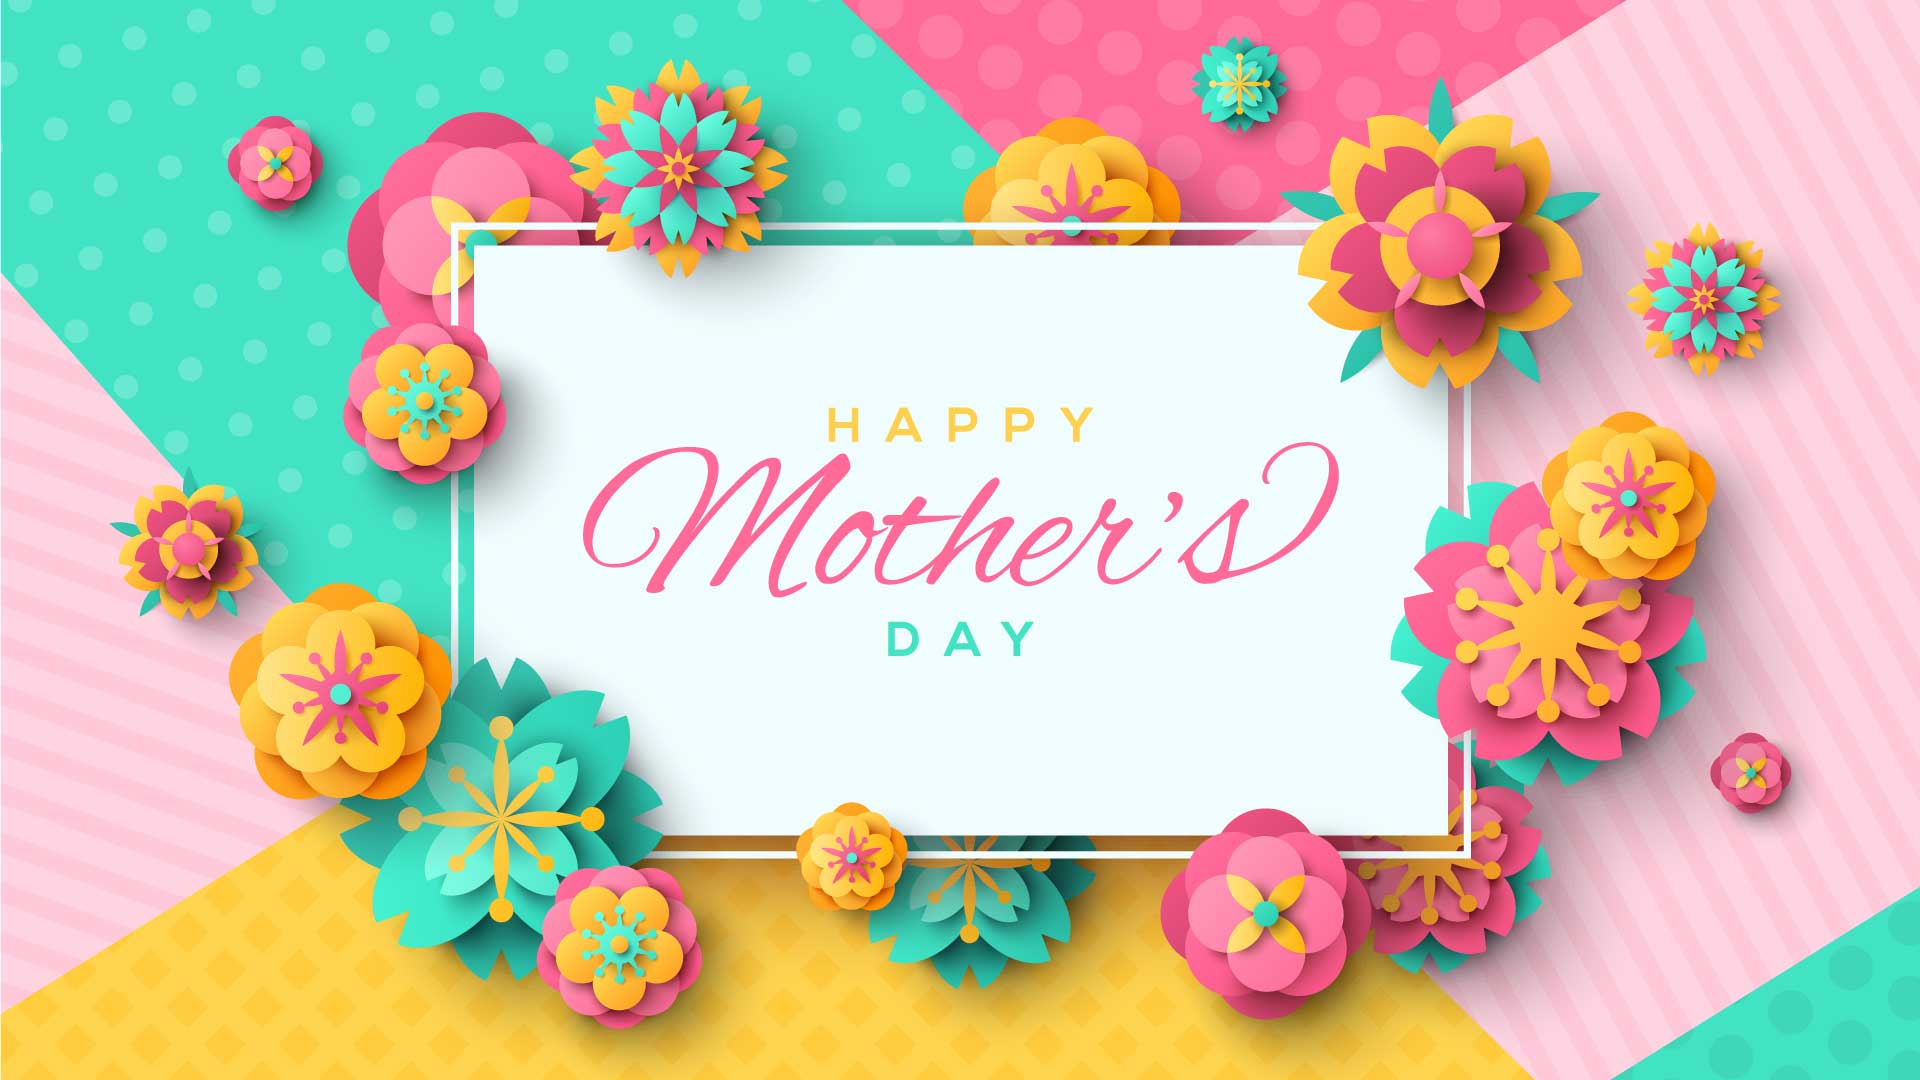 Happy Mother's Day 2018 - Law Offices of Kim M. Pettit